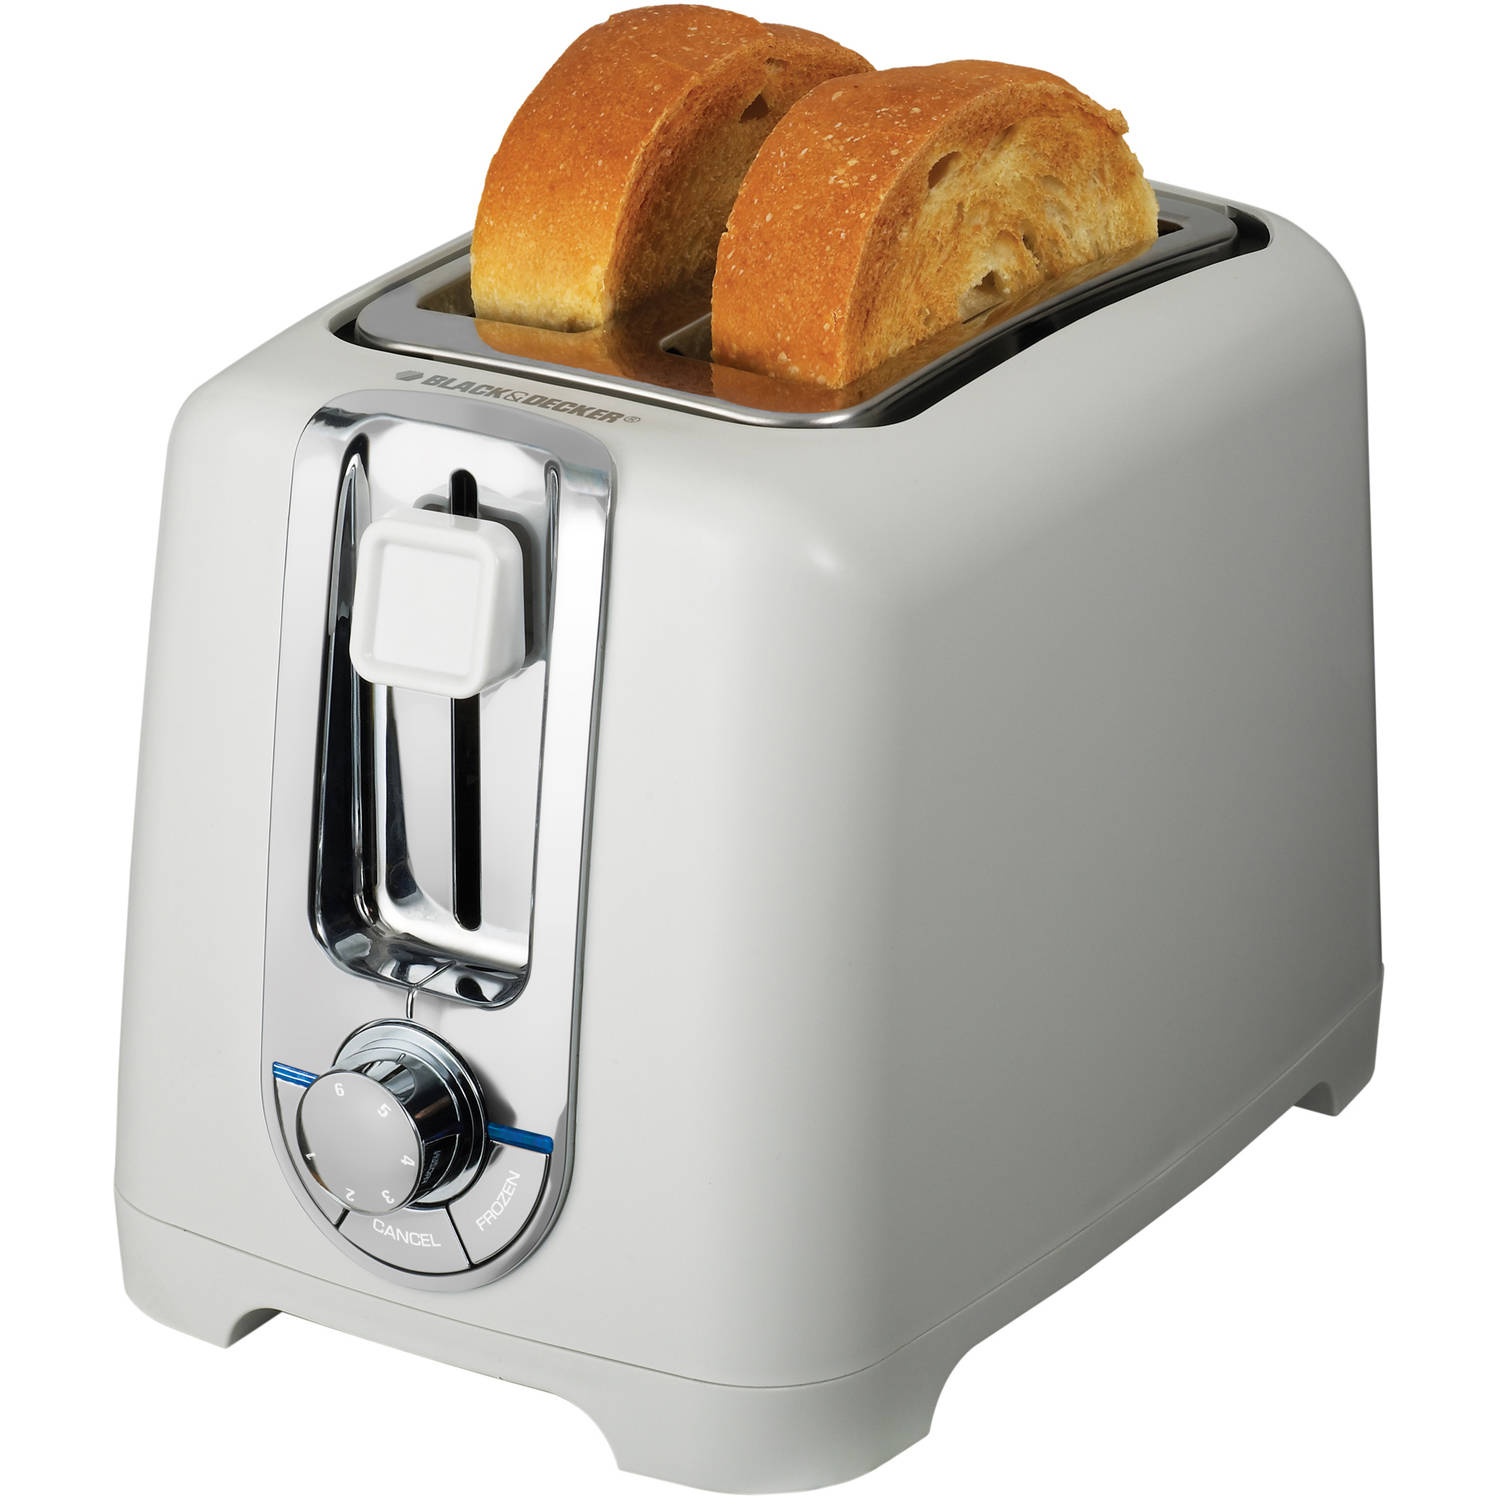 Black & Decker 2-Slice White Toaster with Bagel Function - image 1 of 6